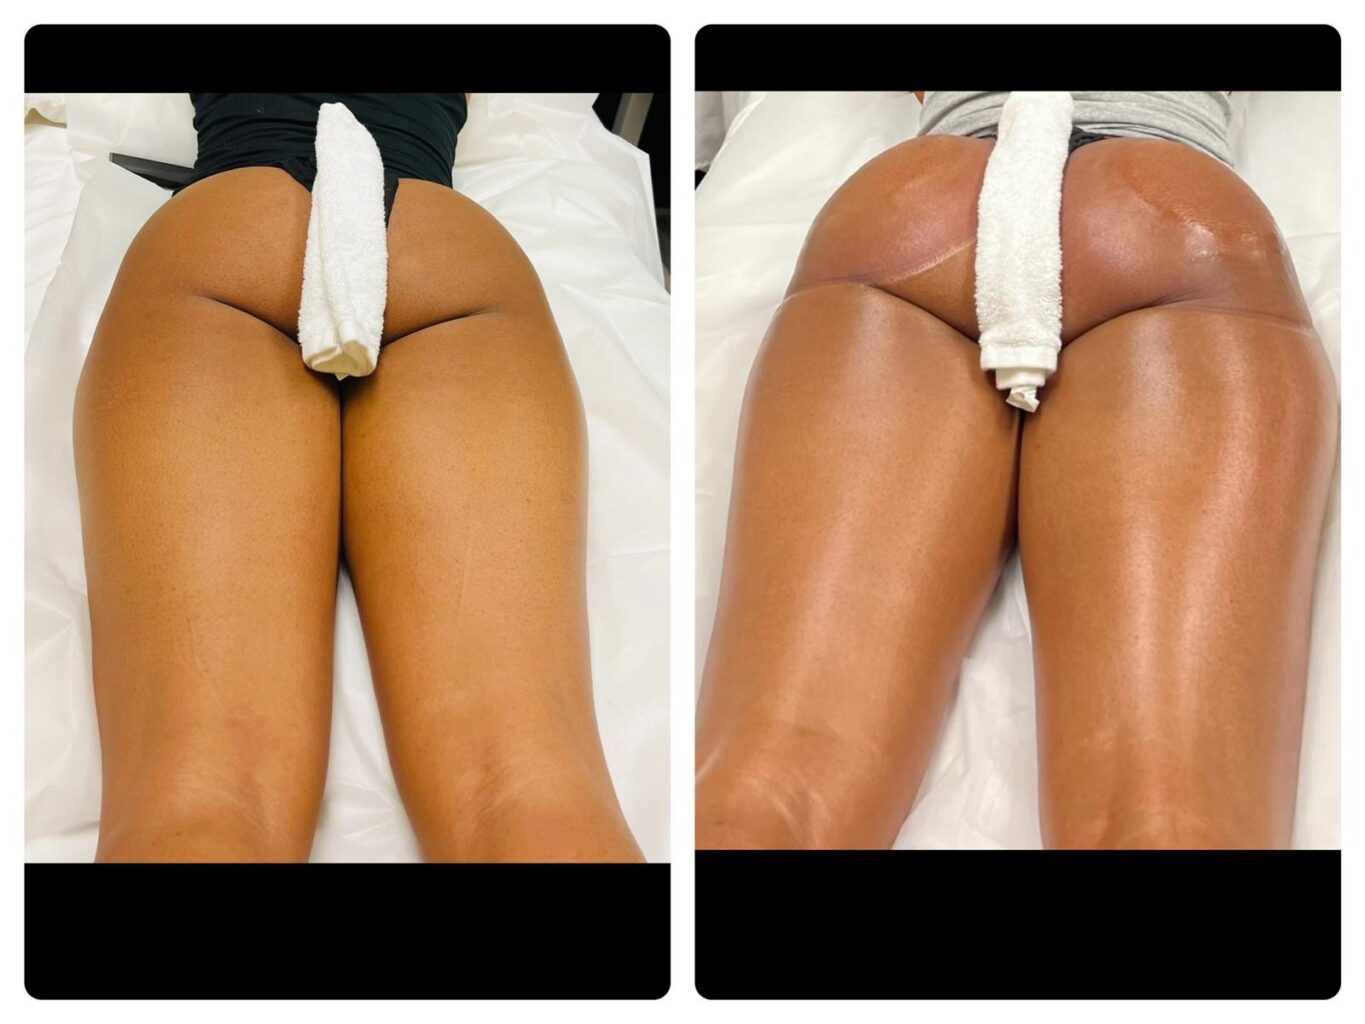 non surgical butt lift before and after in Los angeles by prestigious body contouring